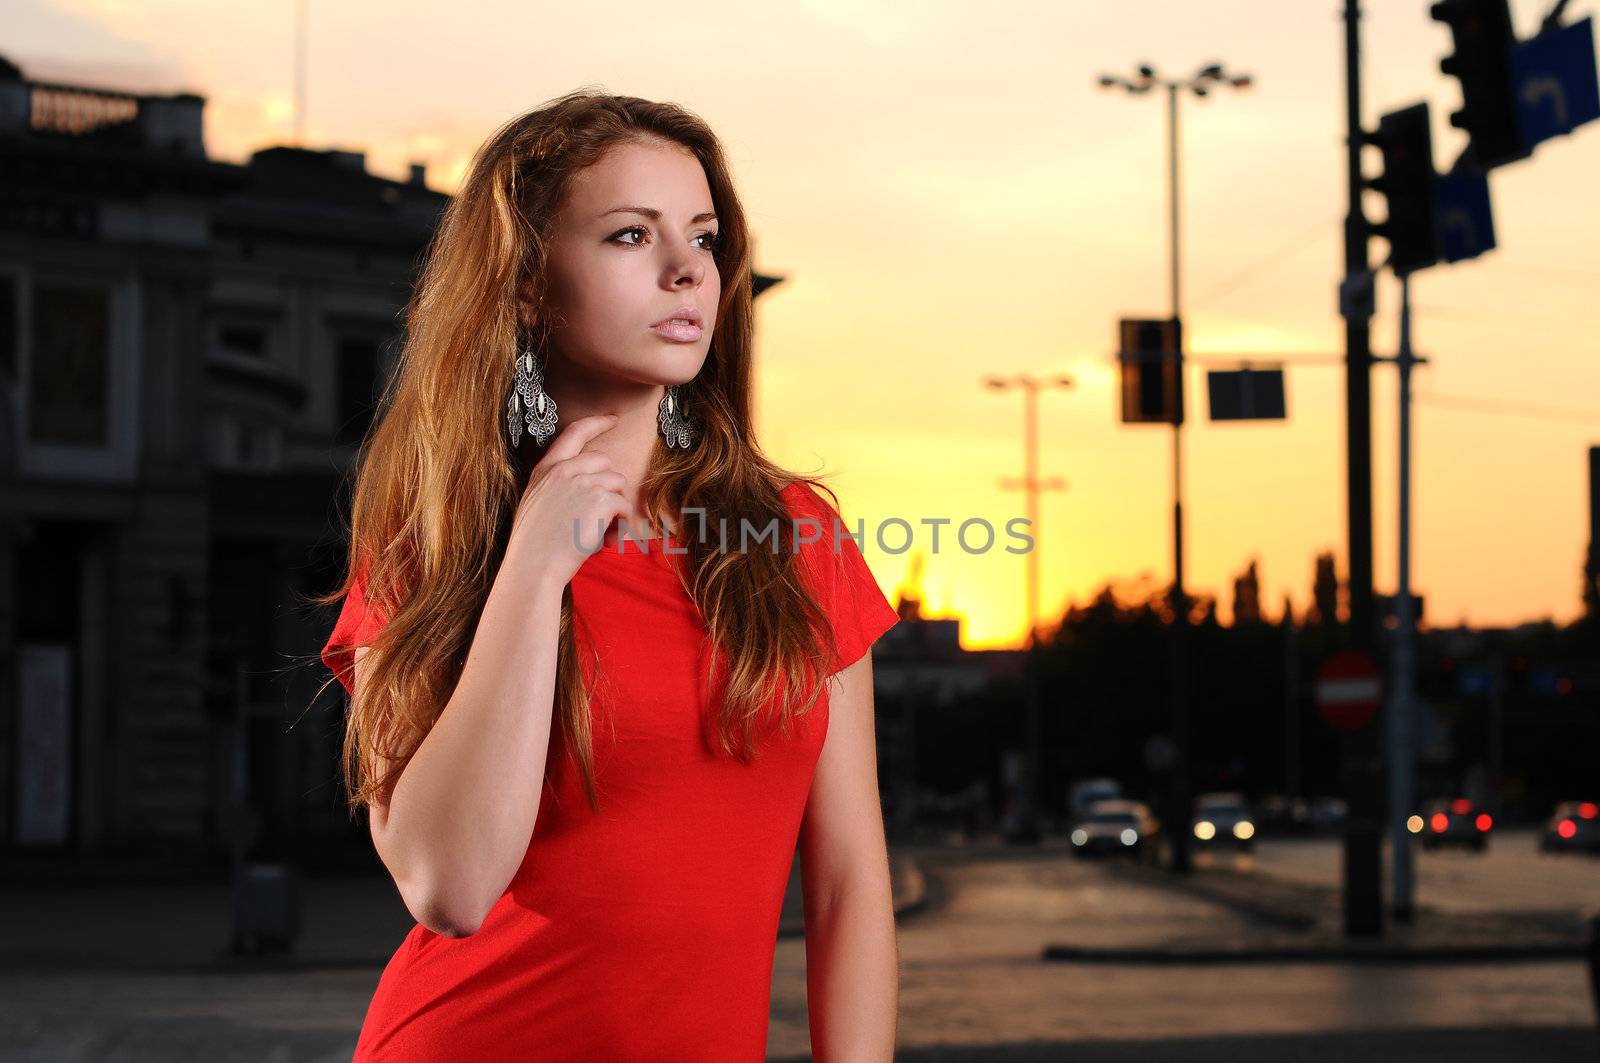 Portrait of a young attractive woman in a red dress in the city at dusk by gravityimaging1